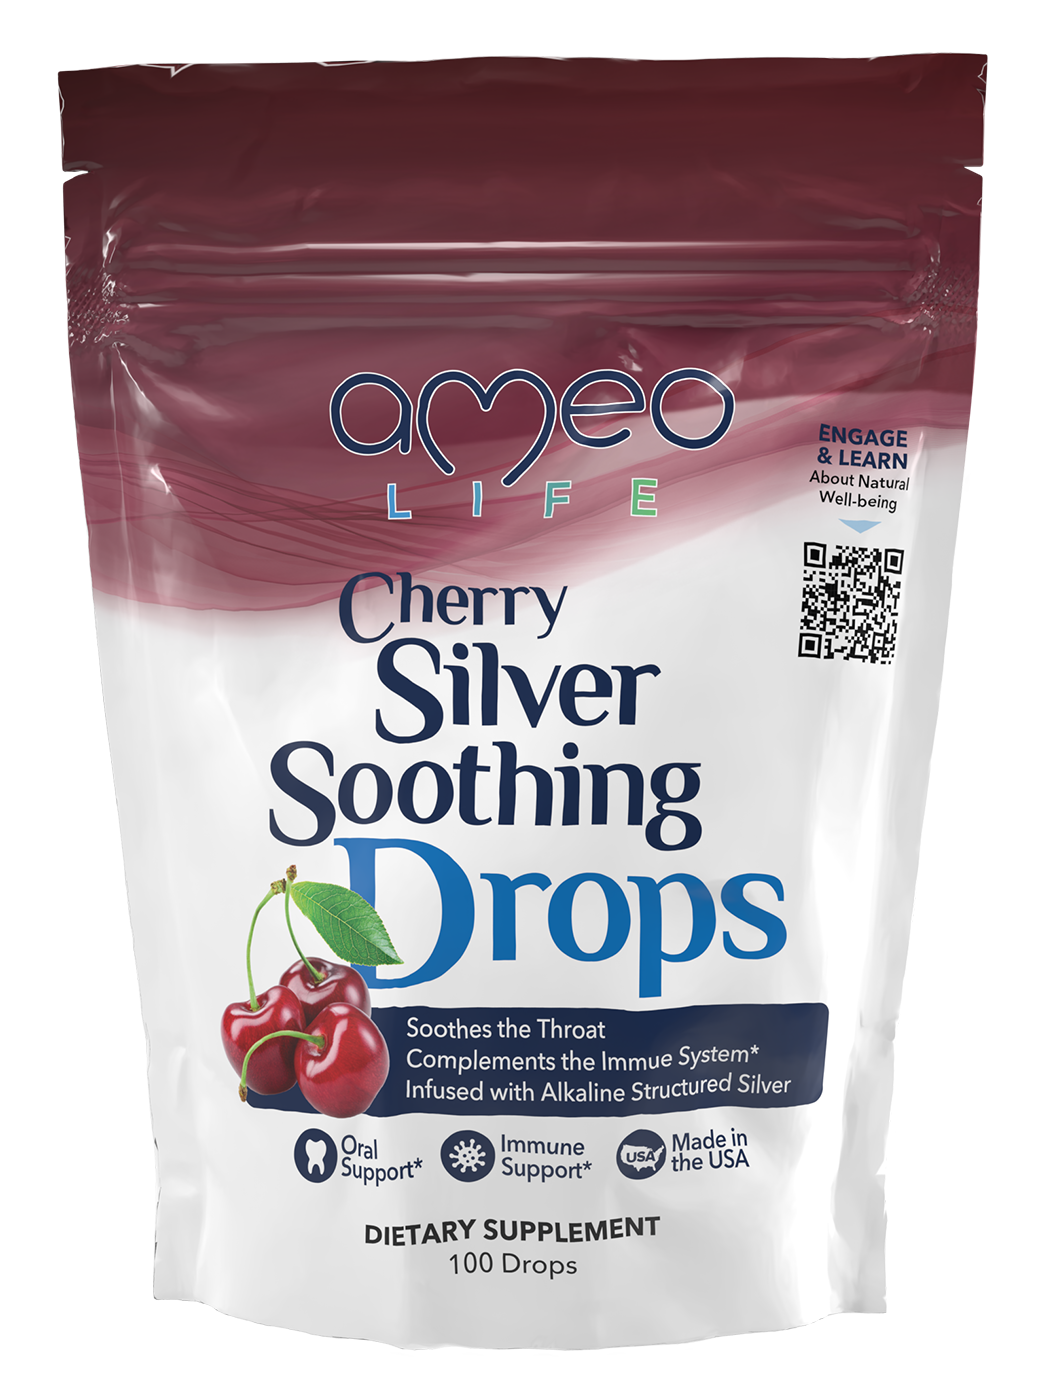 Cherry Silver Soothing Drops